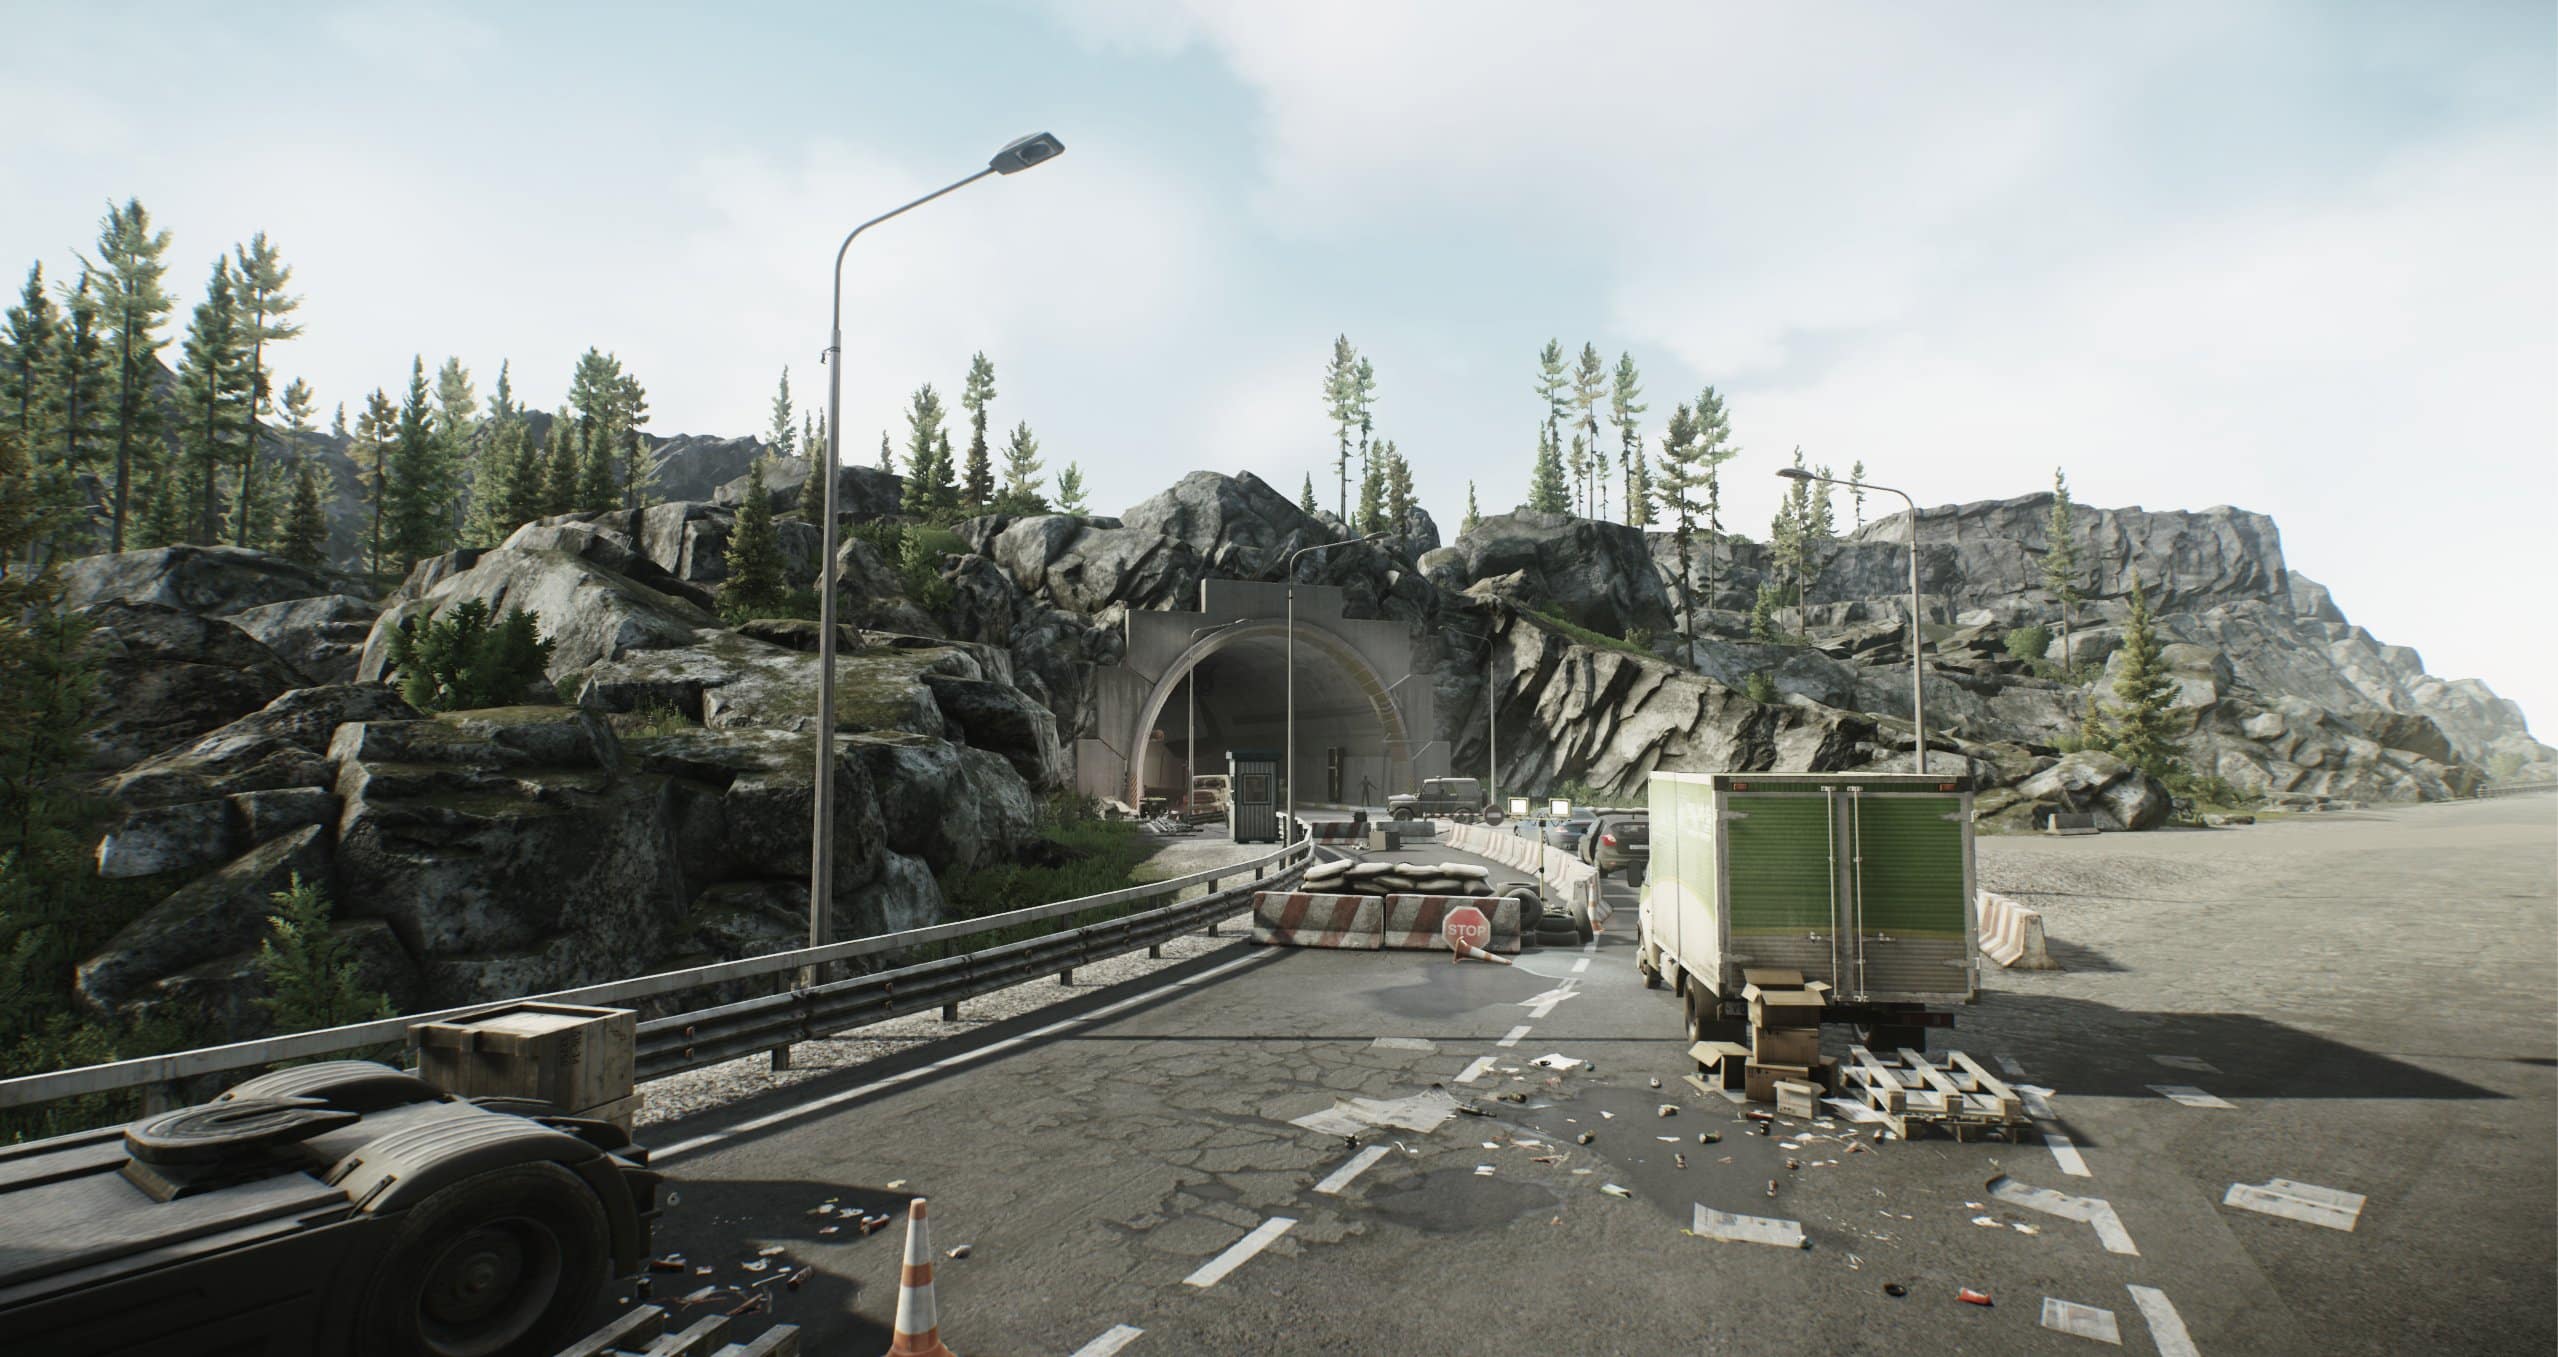 When is The Next Escape From Tarkov Wipe - 2023 Summer Edition?